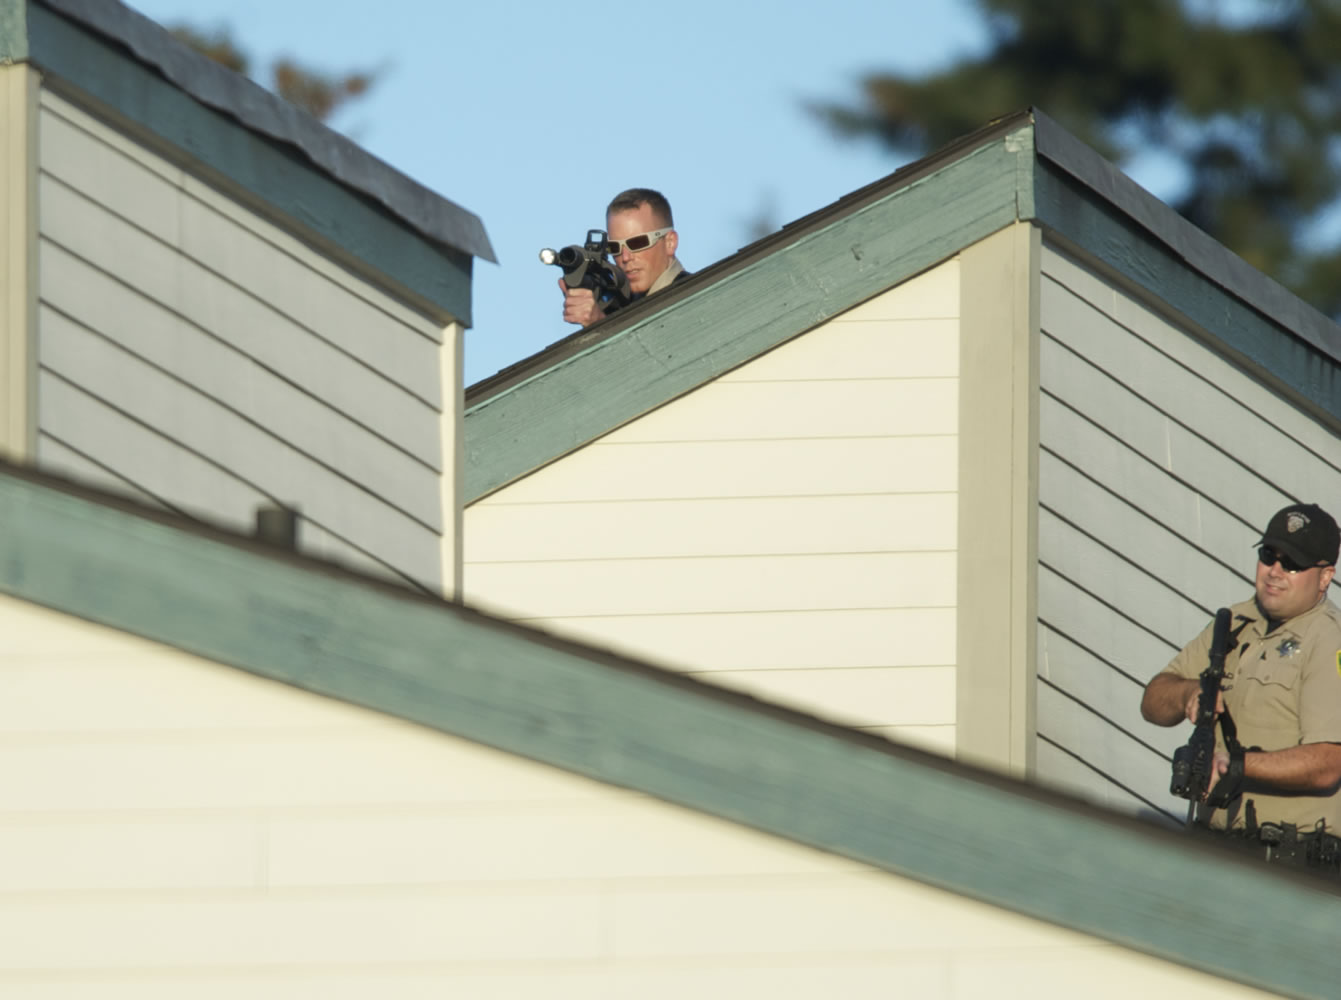 Sheriff's deputies stood by with less-than-lethal weapons Saturday during the standoff.